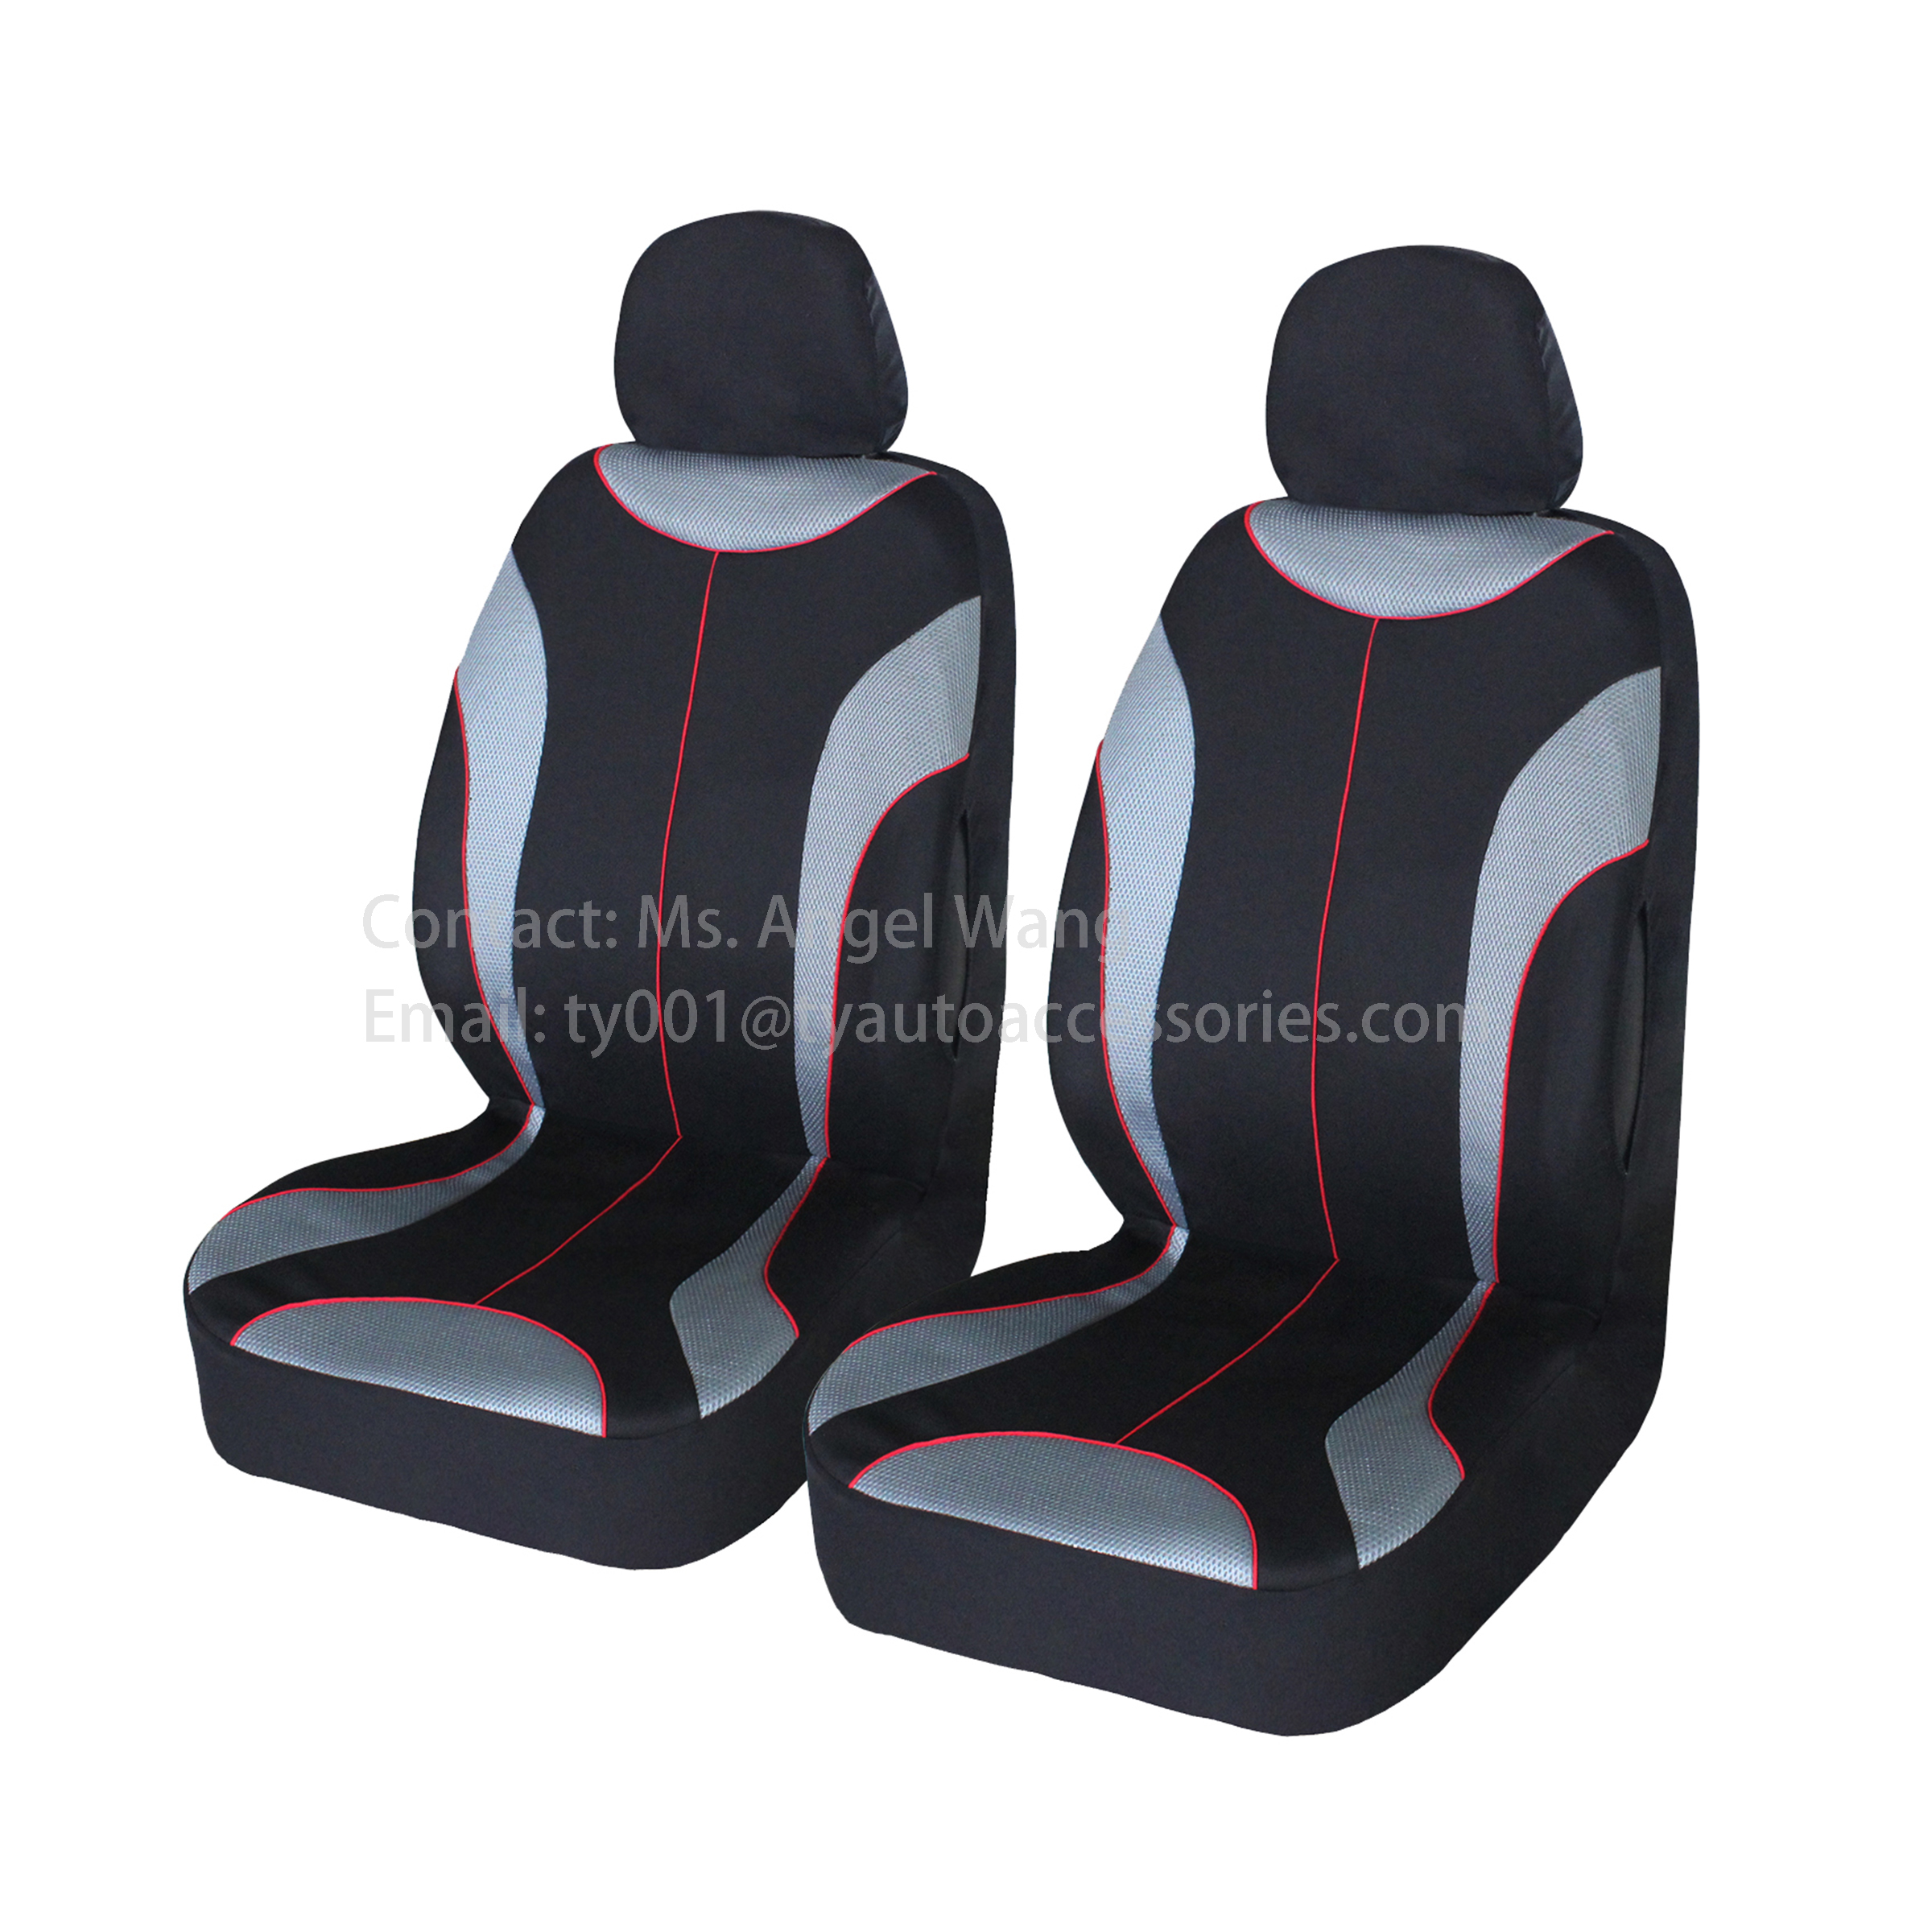 2020 New Arrival Universal Size Luxury Polyester Fabric Cushion Auto Front Printing Car Seat Covers